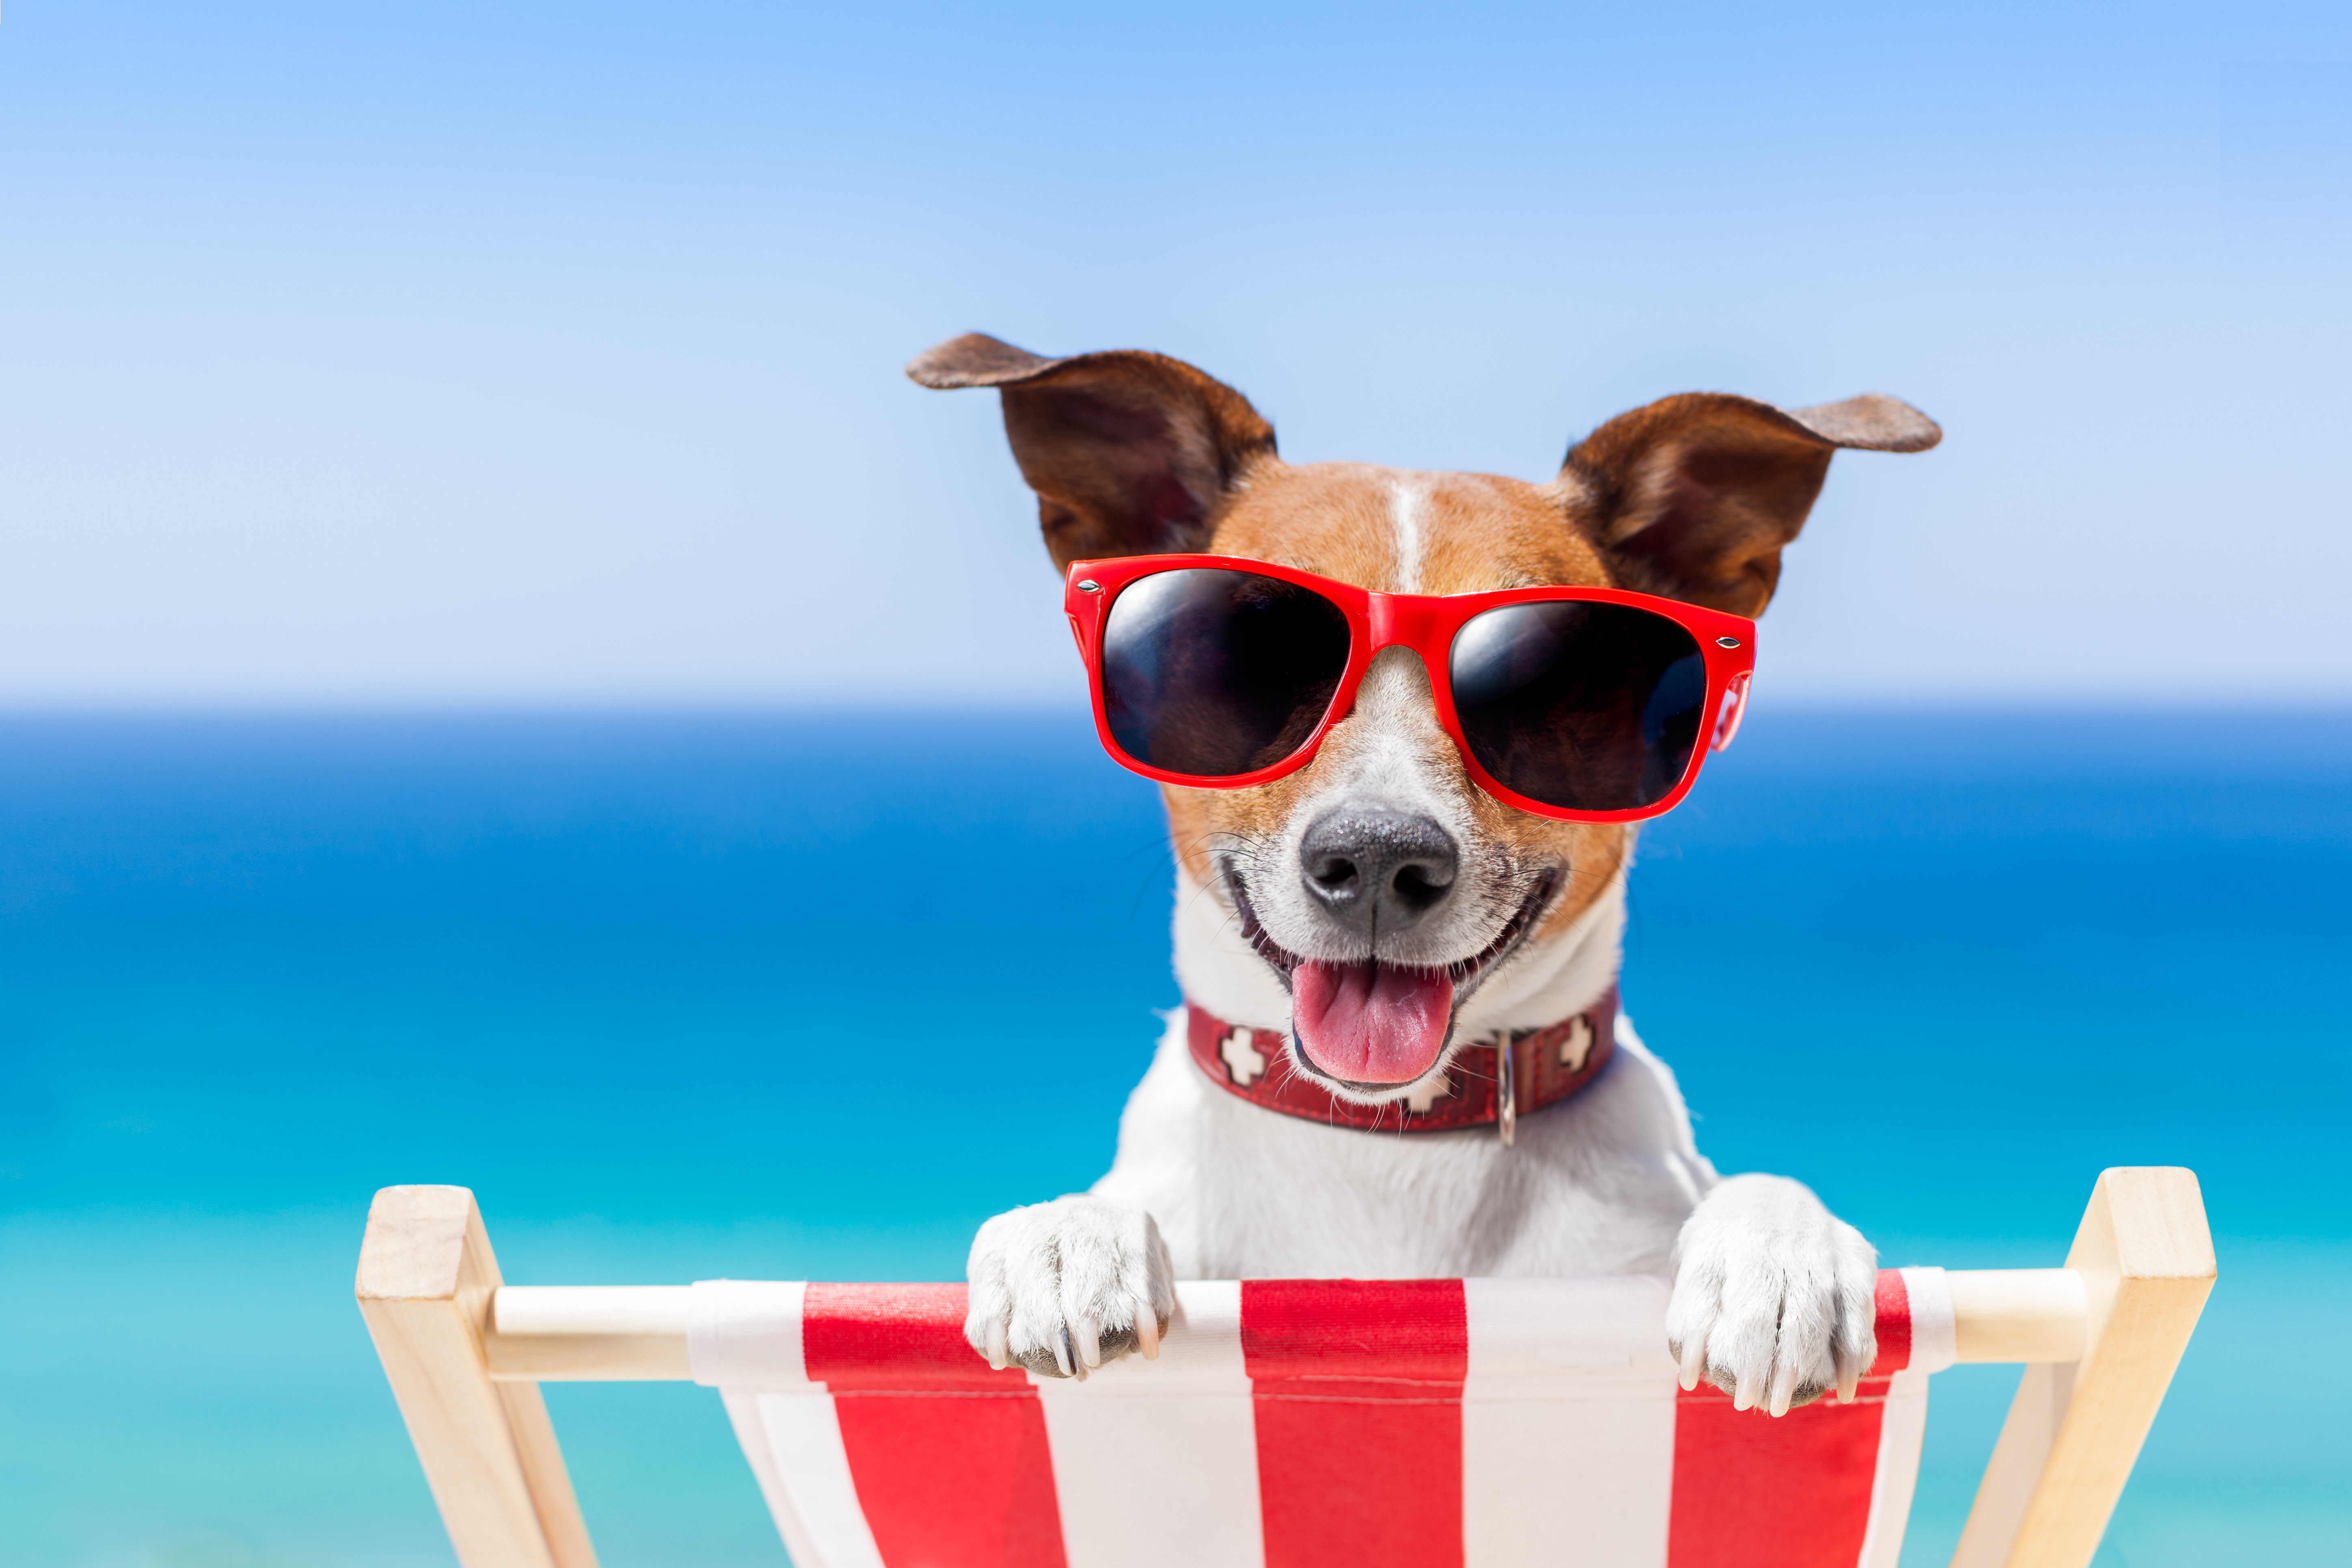 A dog sits on a beach chair wearing sunglasses.